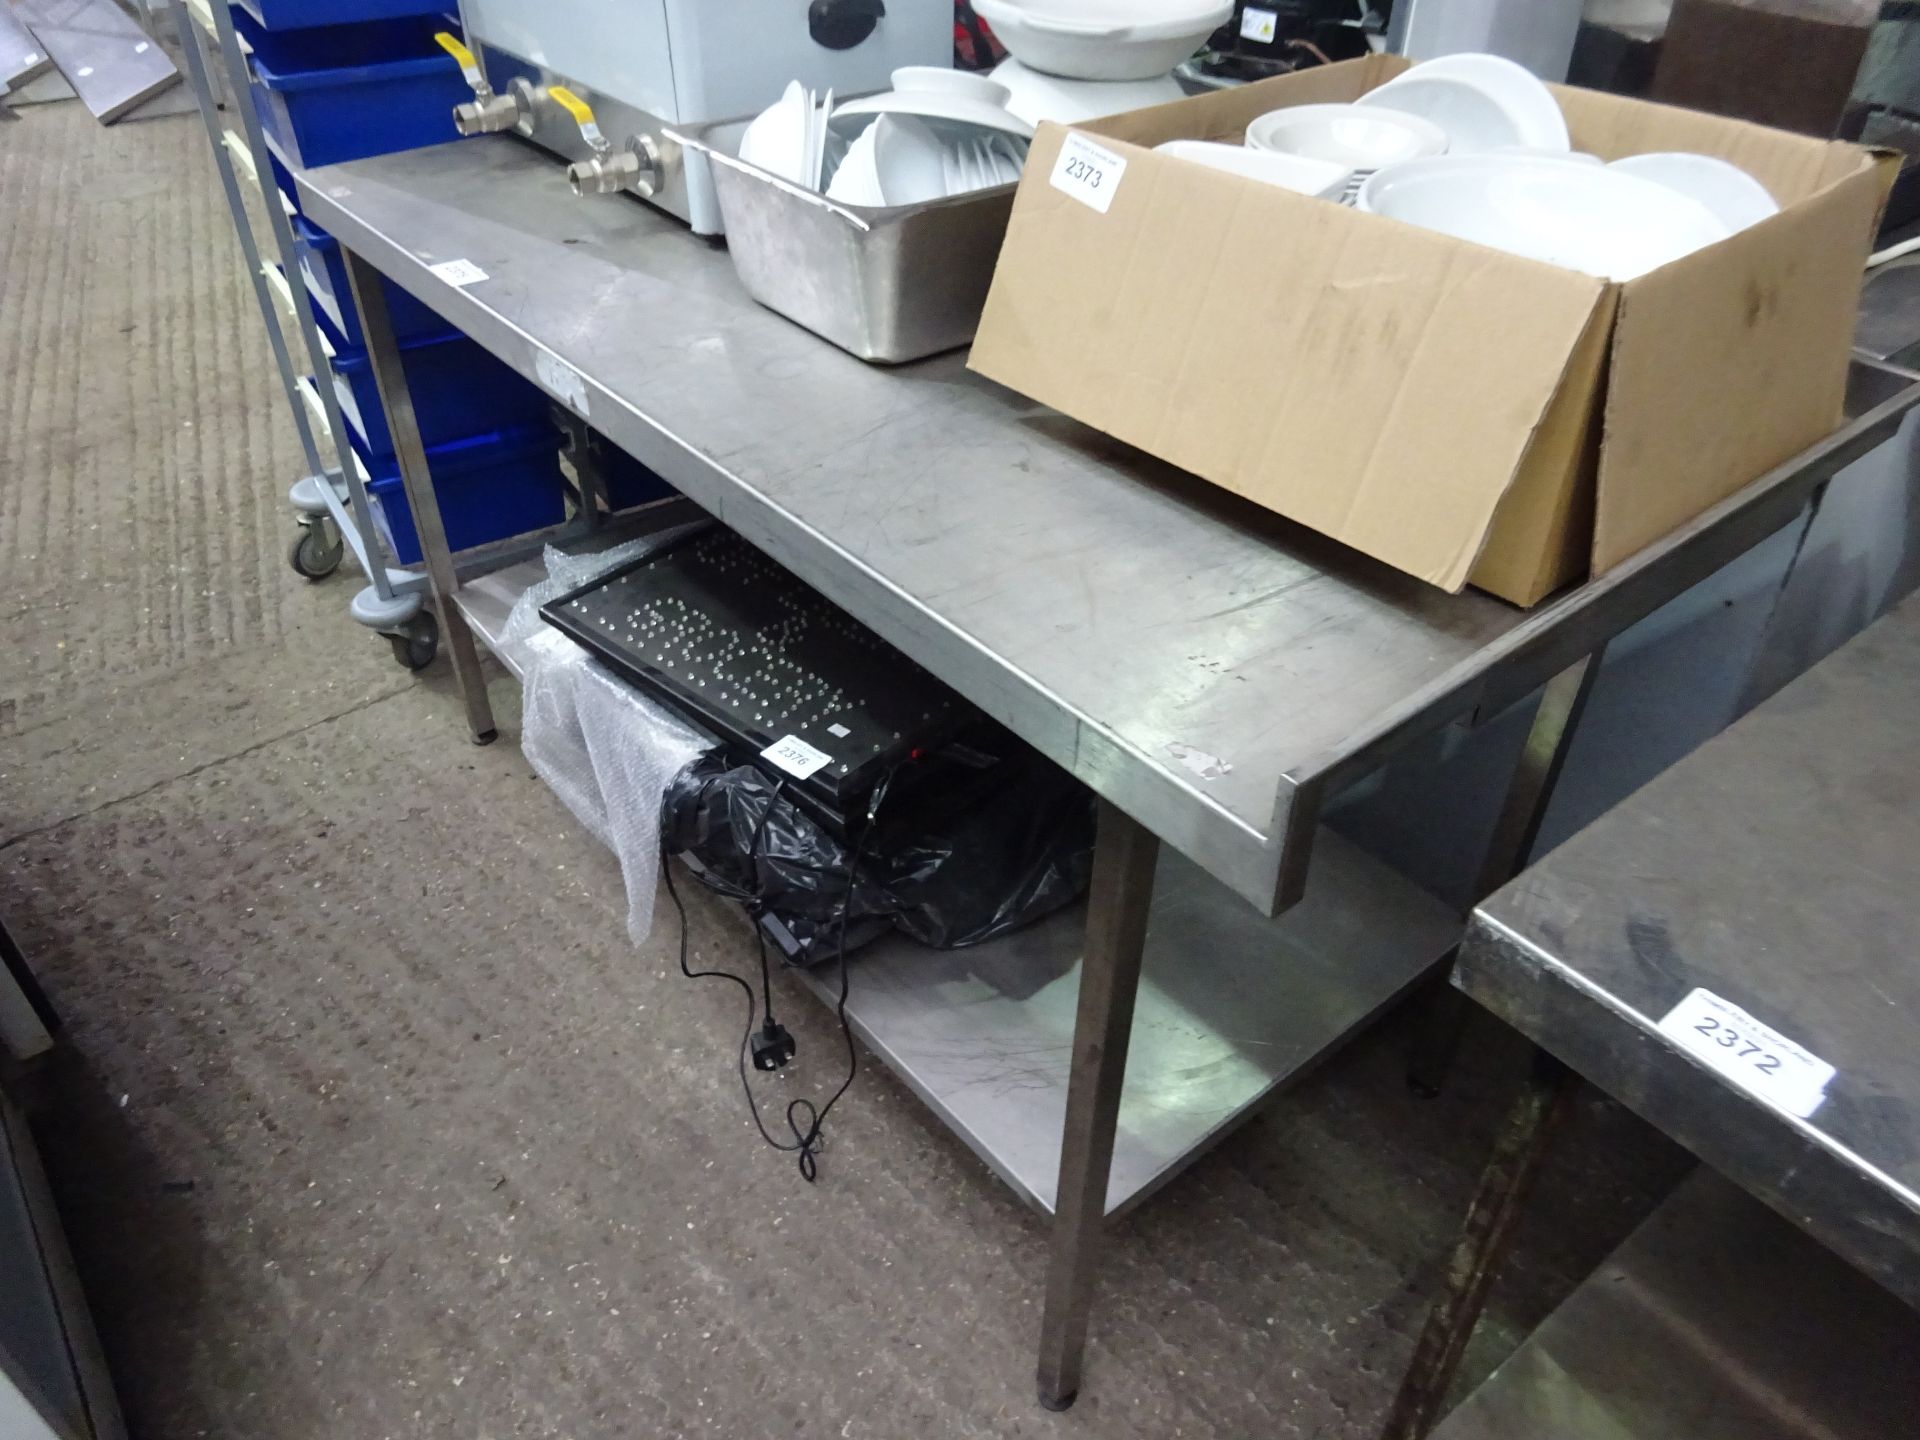 Stainless steel preparation table with under shelf W: 150cms, D: 77cms, H: 90cms